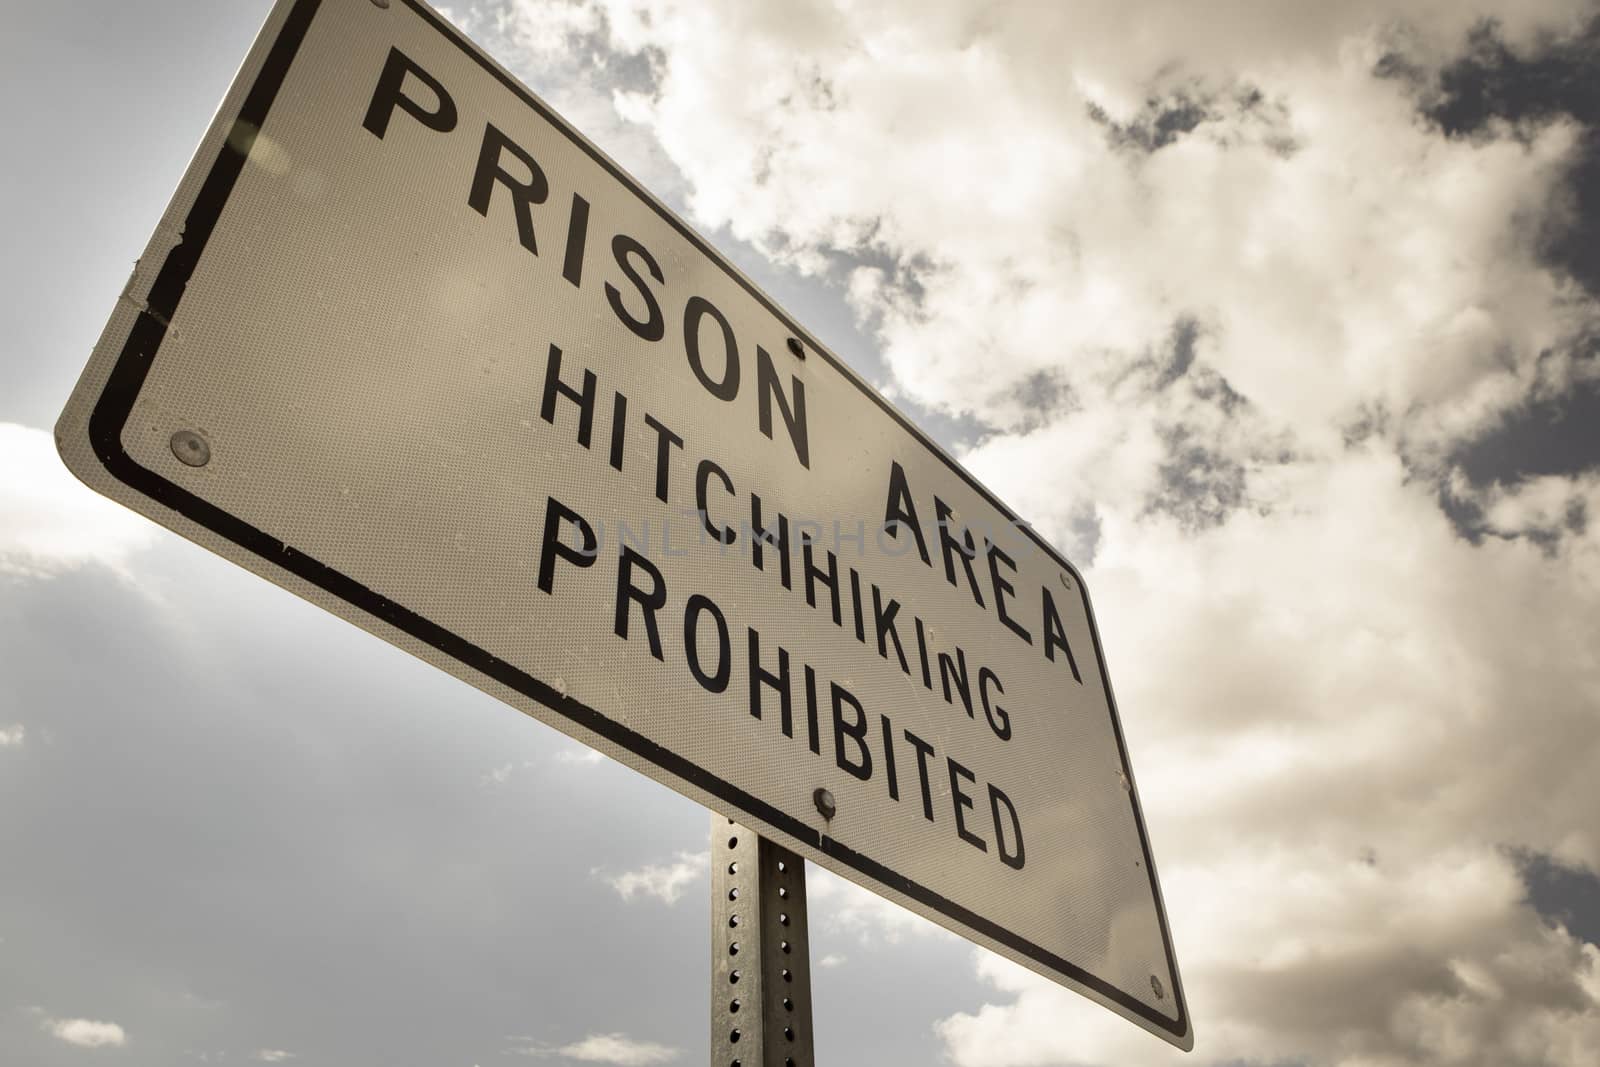 Sign reading "Prison area, hitchhiking prohibited" stands in front of a prison/penitentiary in the desert landscape beneath a cloud filled blue sky. Taken in the Utah state. Retro style image